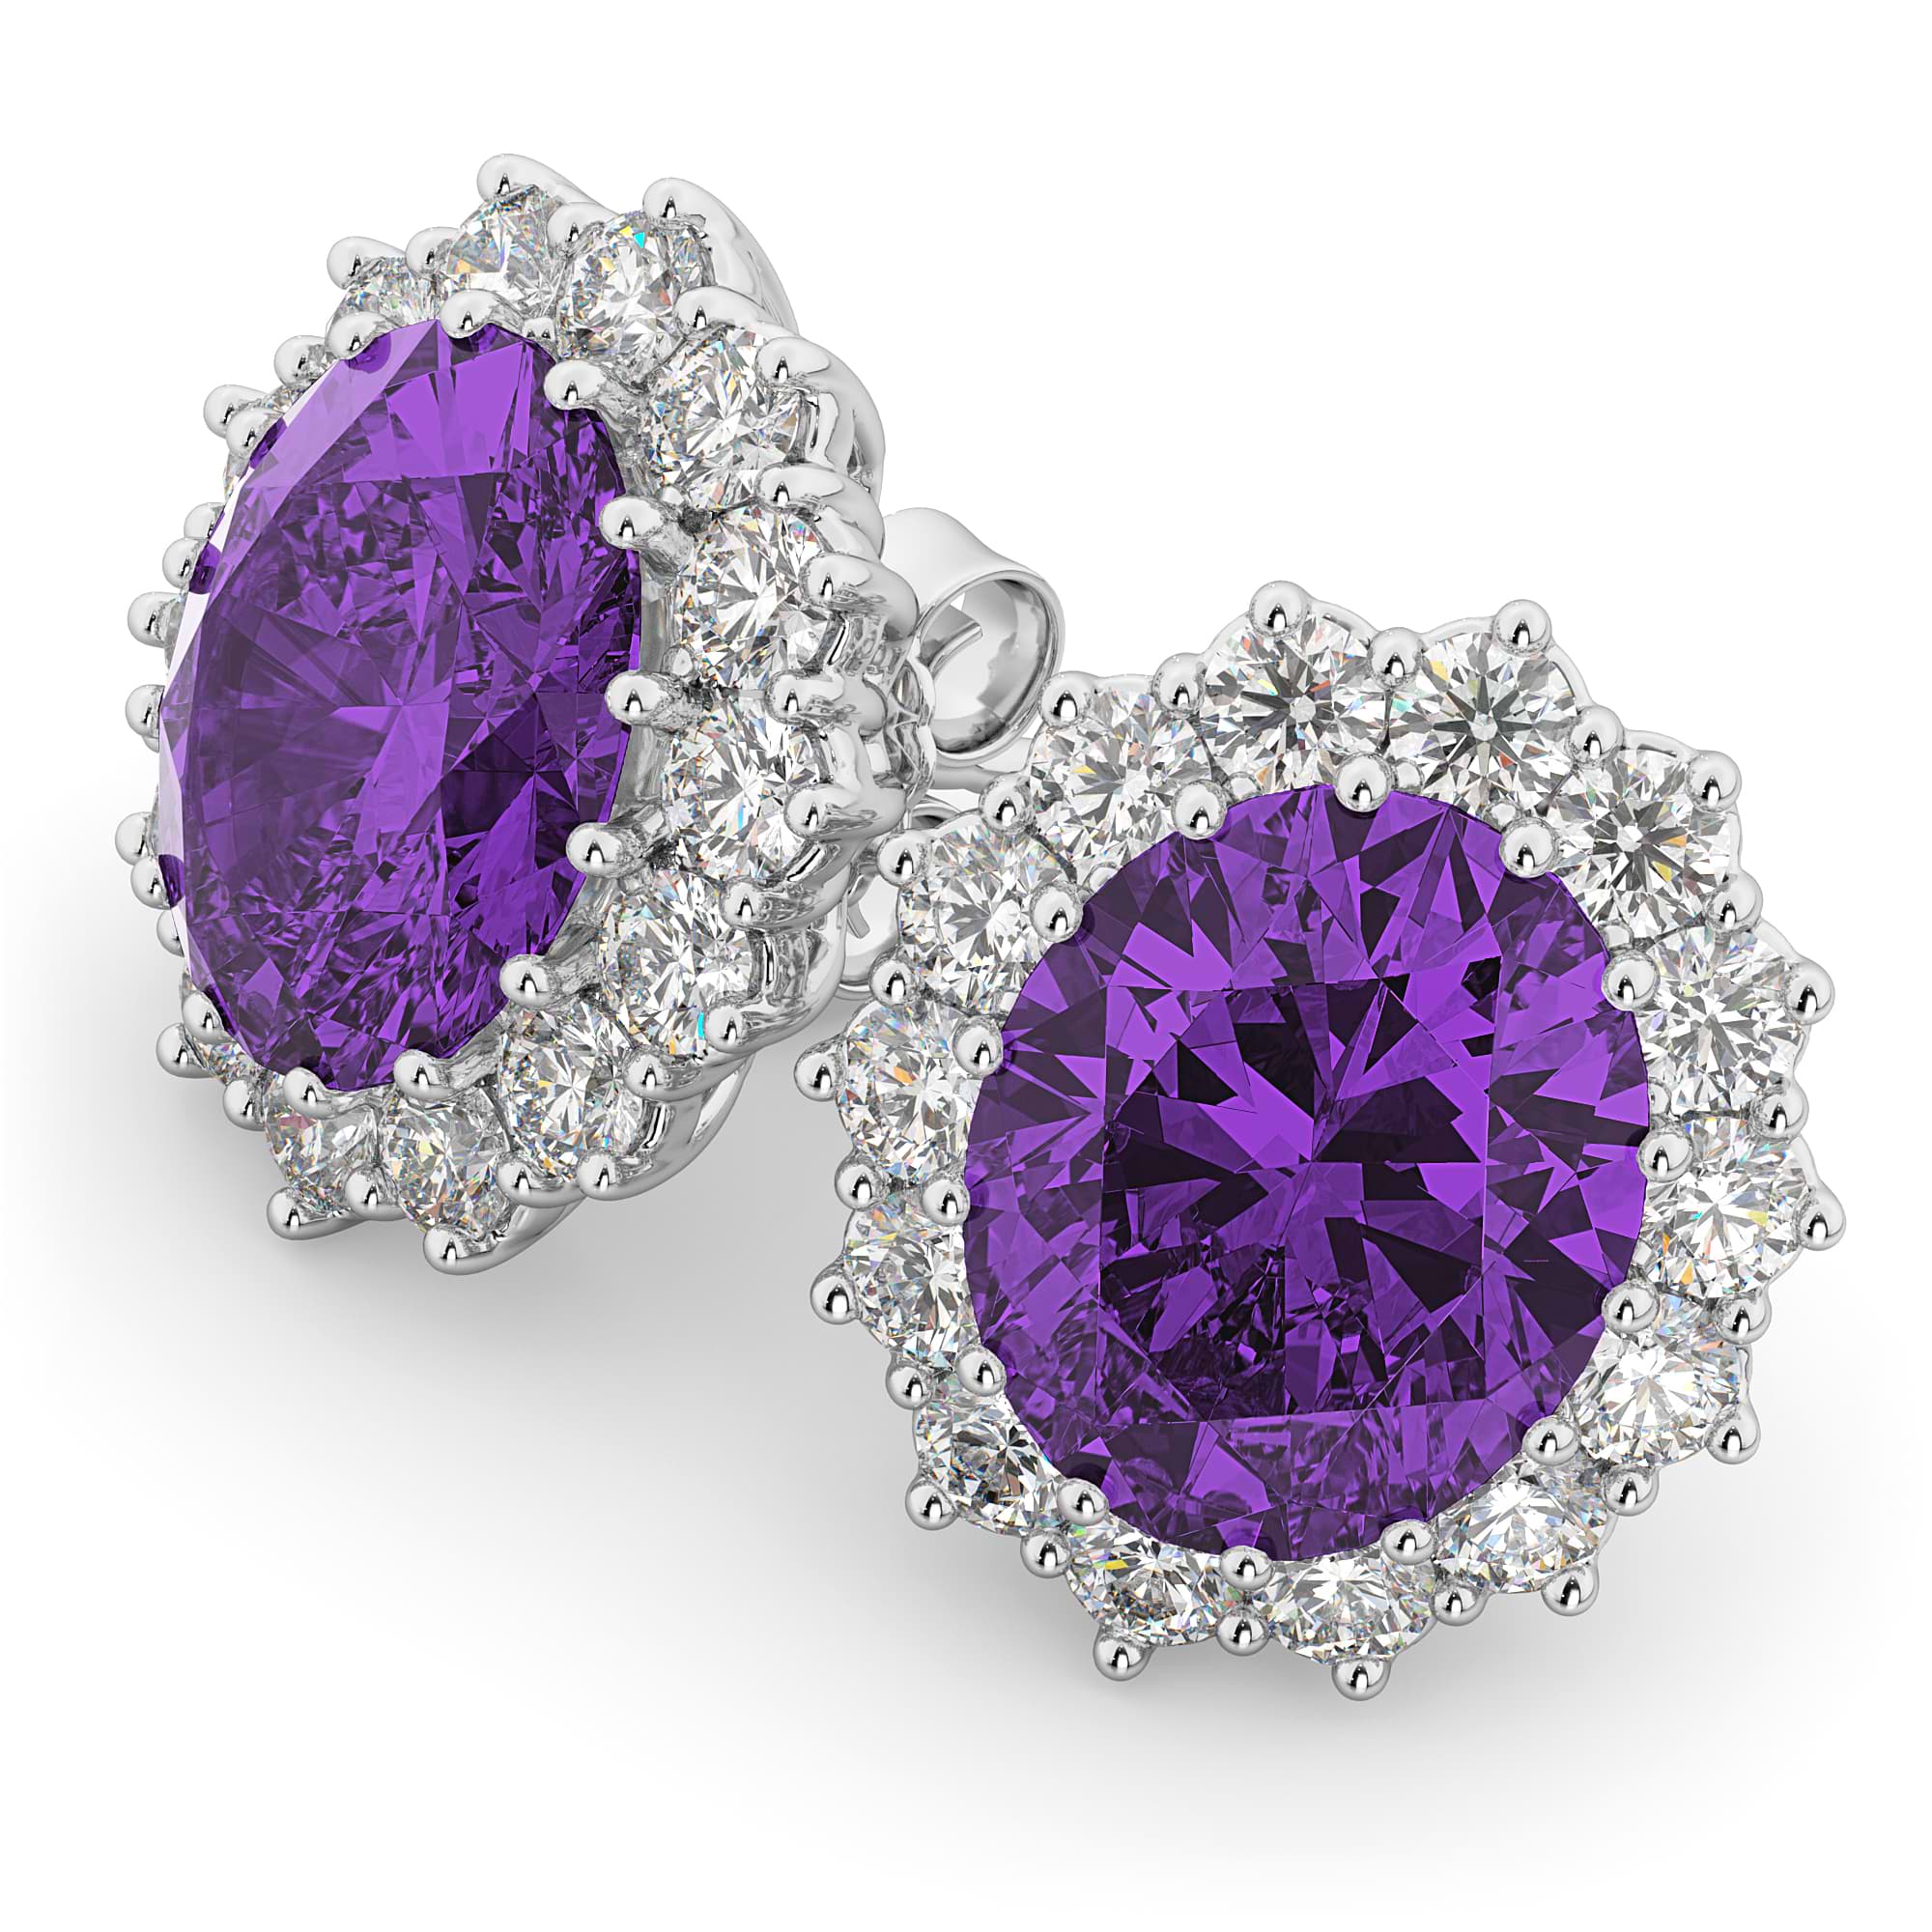 Oval Amethyst & Diamond Accented Earrings 14k White Gold (10.80ctw)